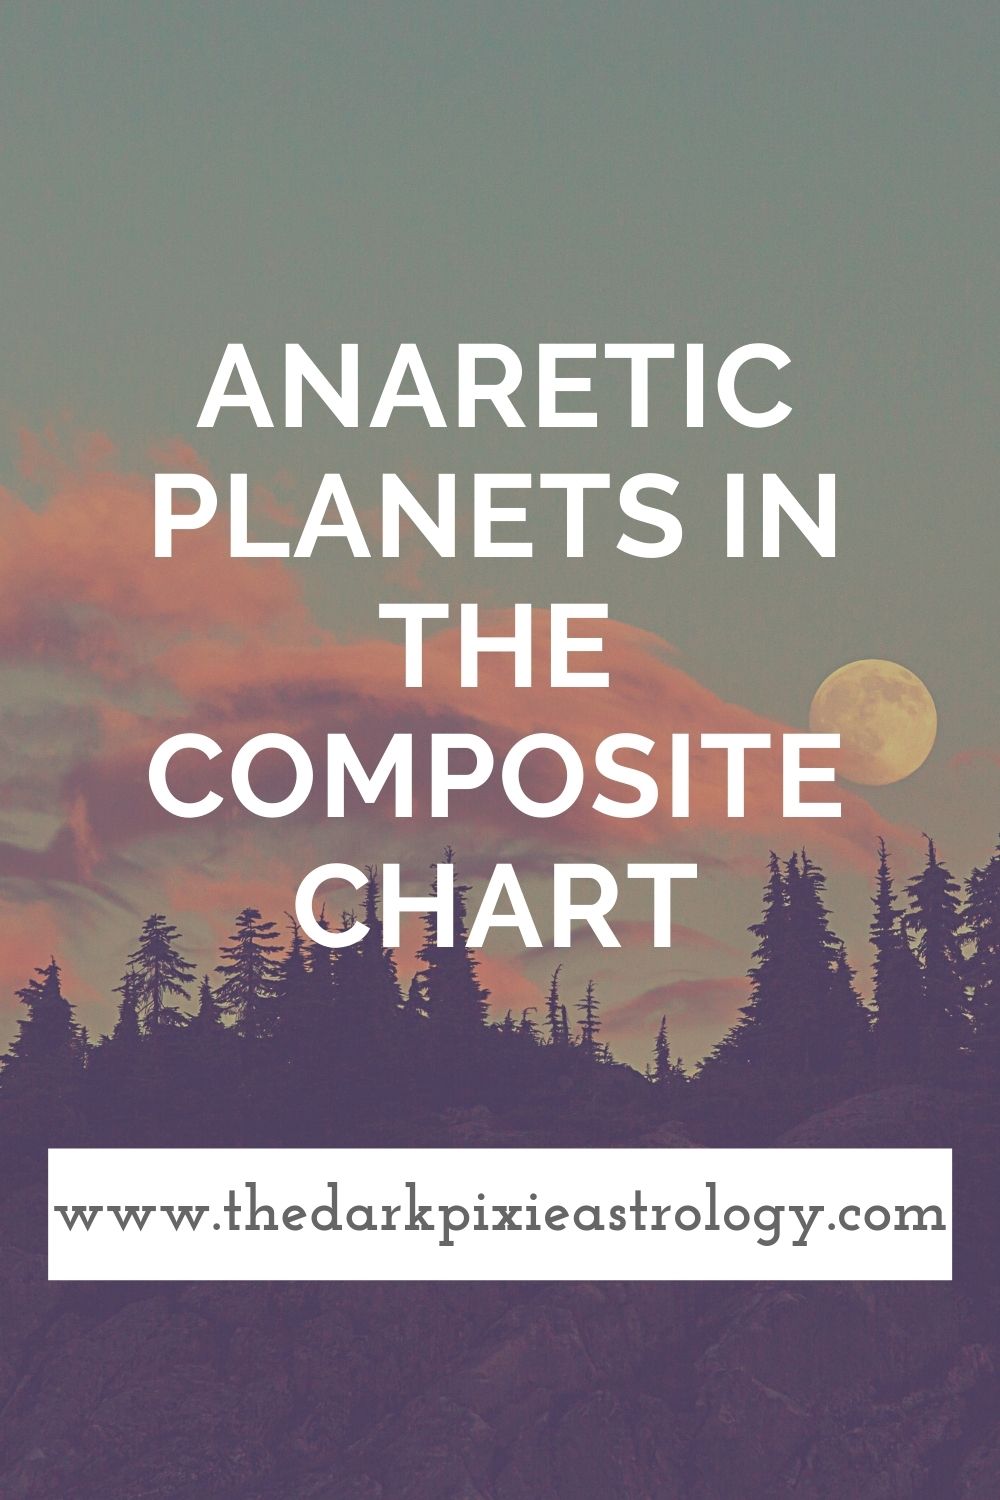 Anaretic Planets in the Composite Chart - The Dark Pixie Astrology